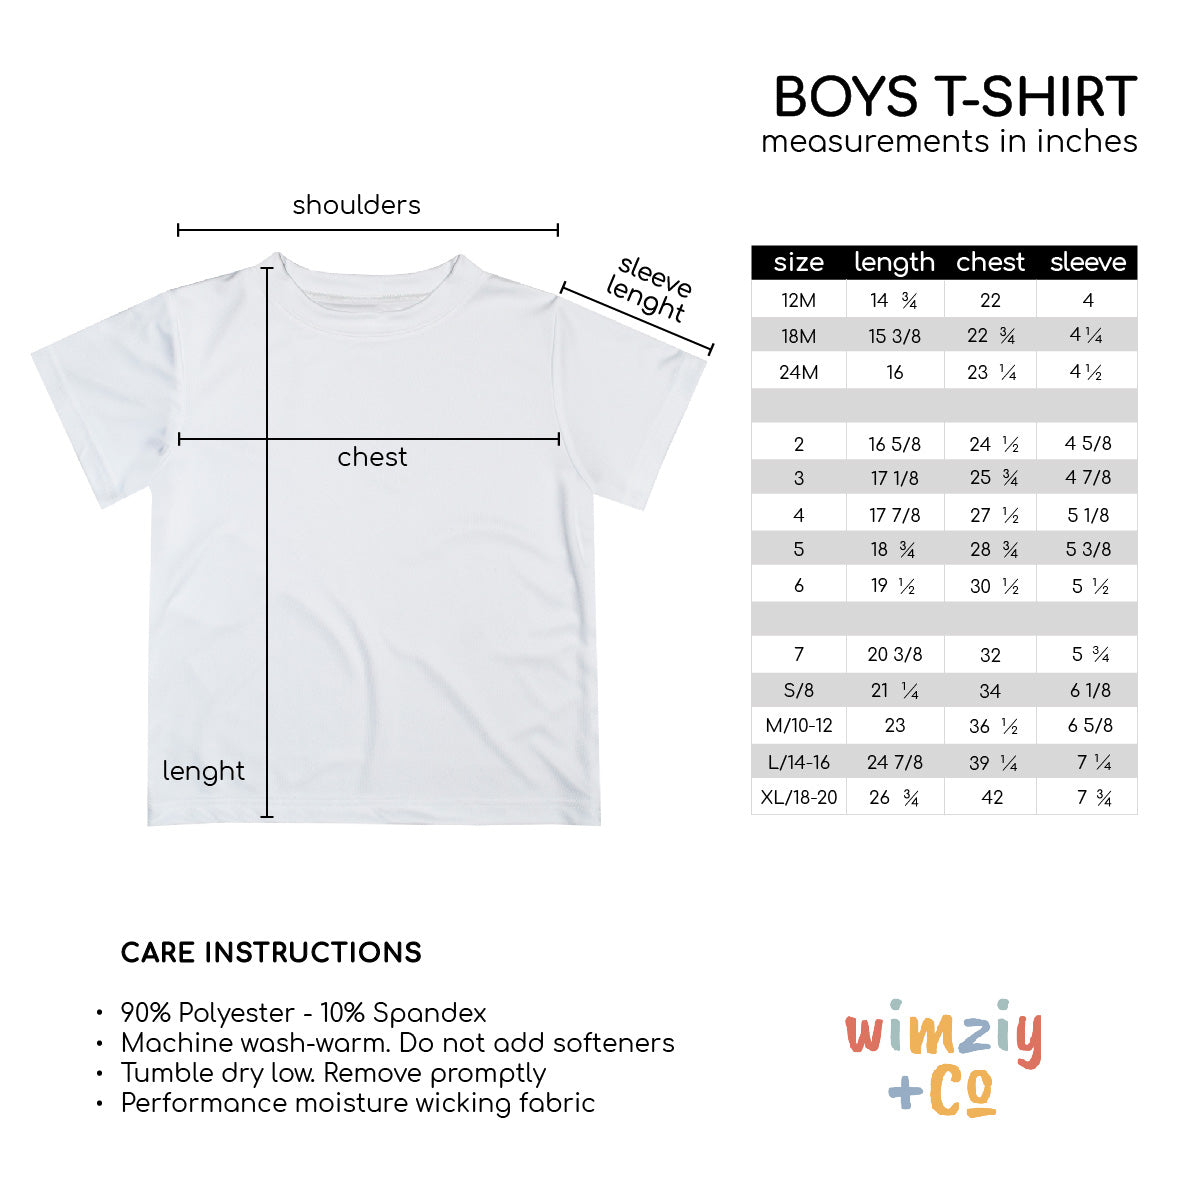 Danger at your age short sleeve boys tee shirt - Wimziy&Co.